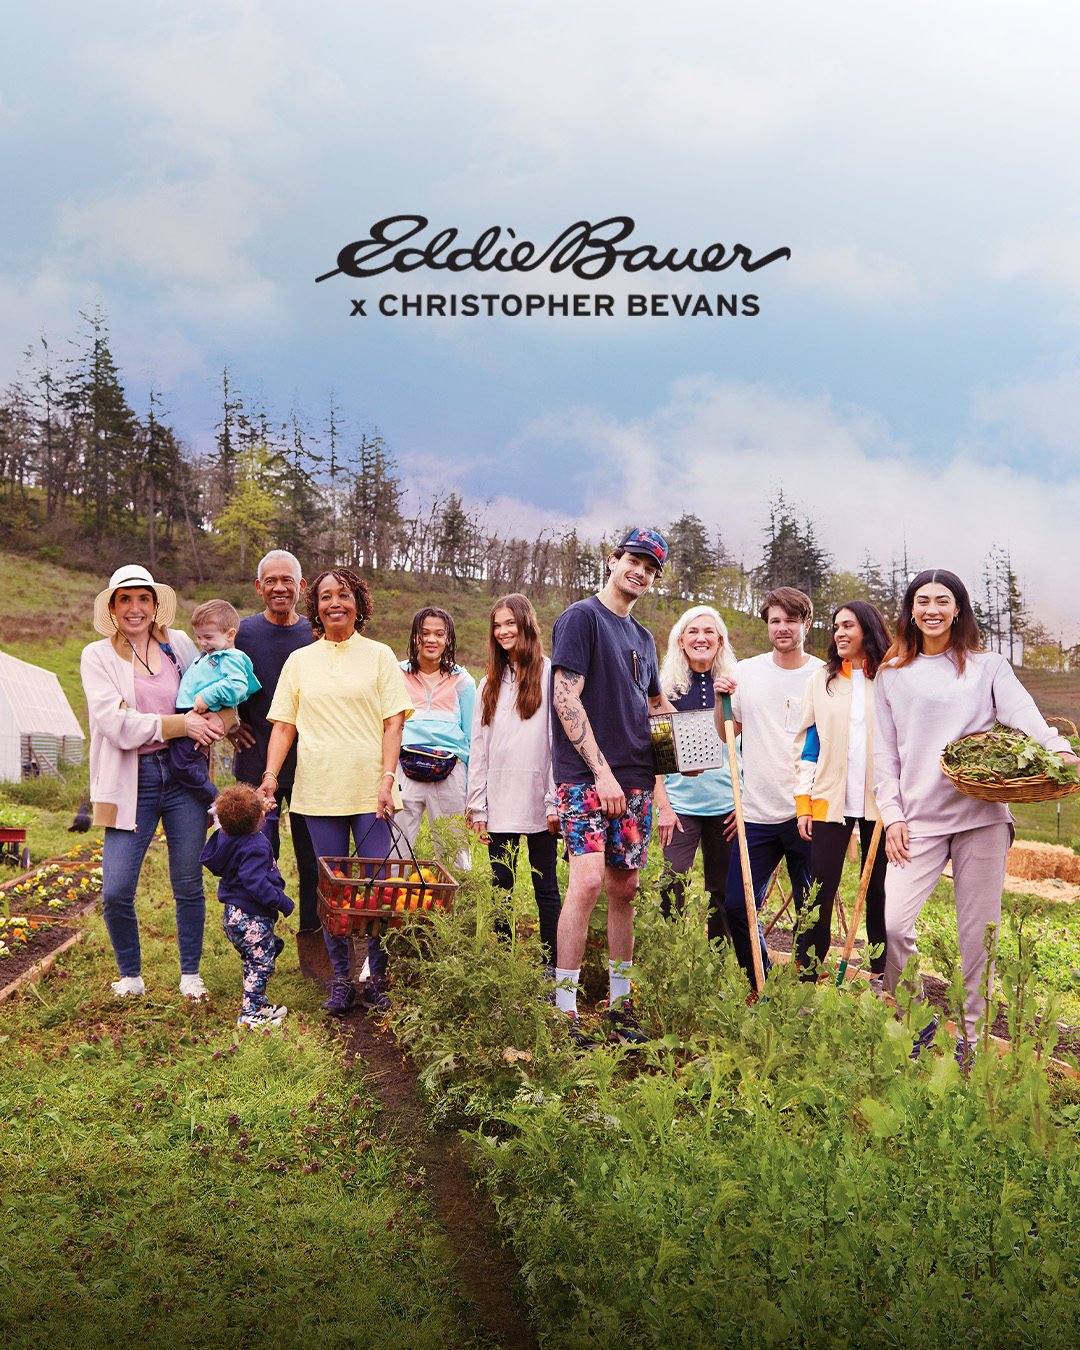 For over 100 years, Eddie Bauer has made apparel, footwear, and 